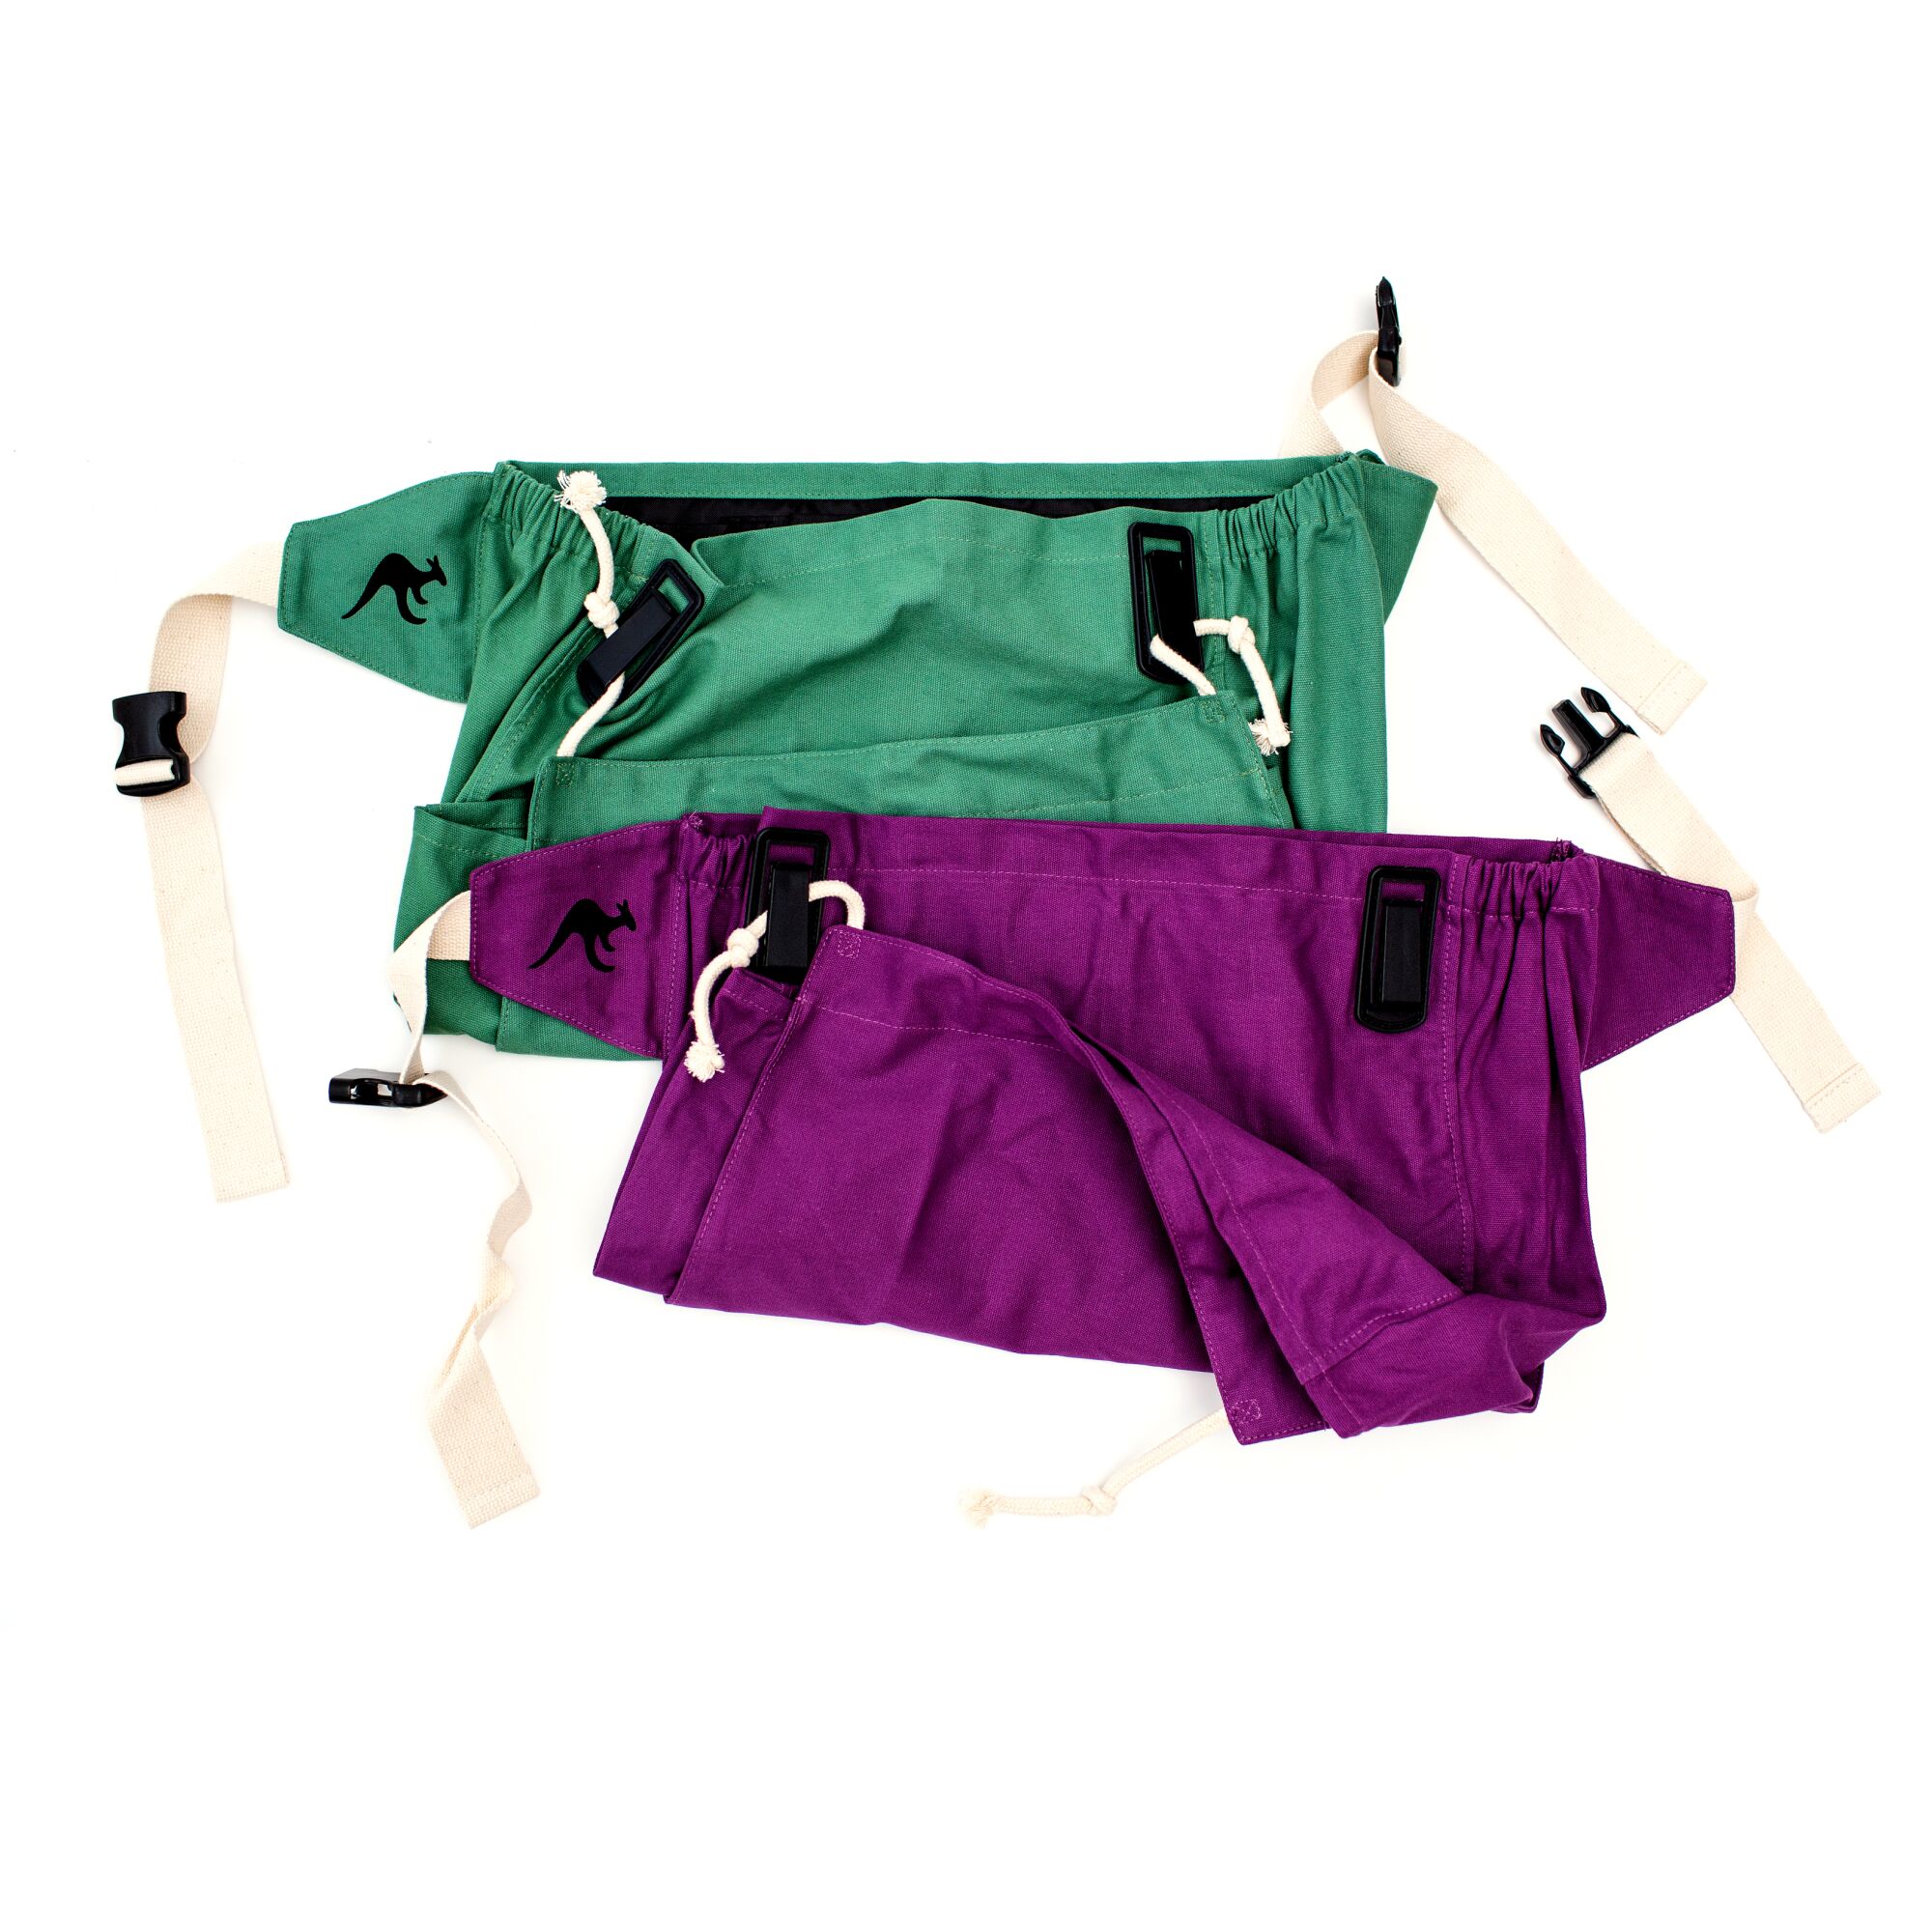 Purple and green aprons.